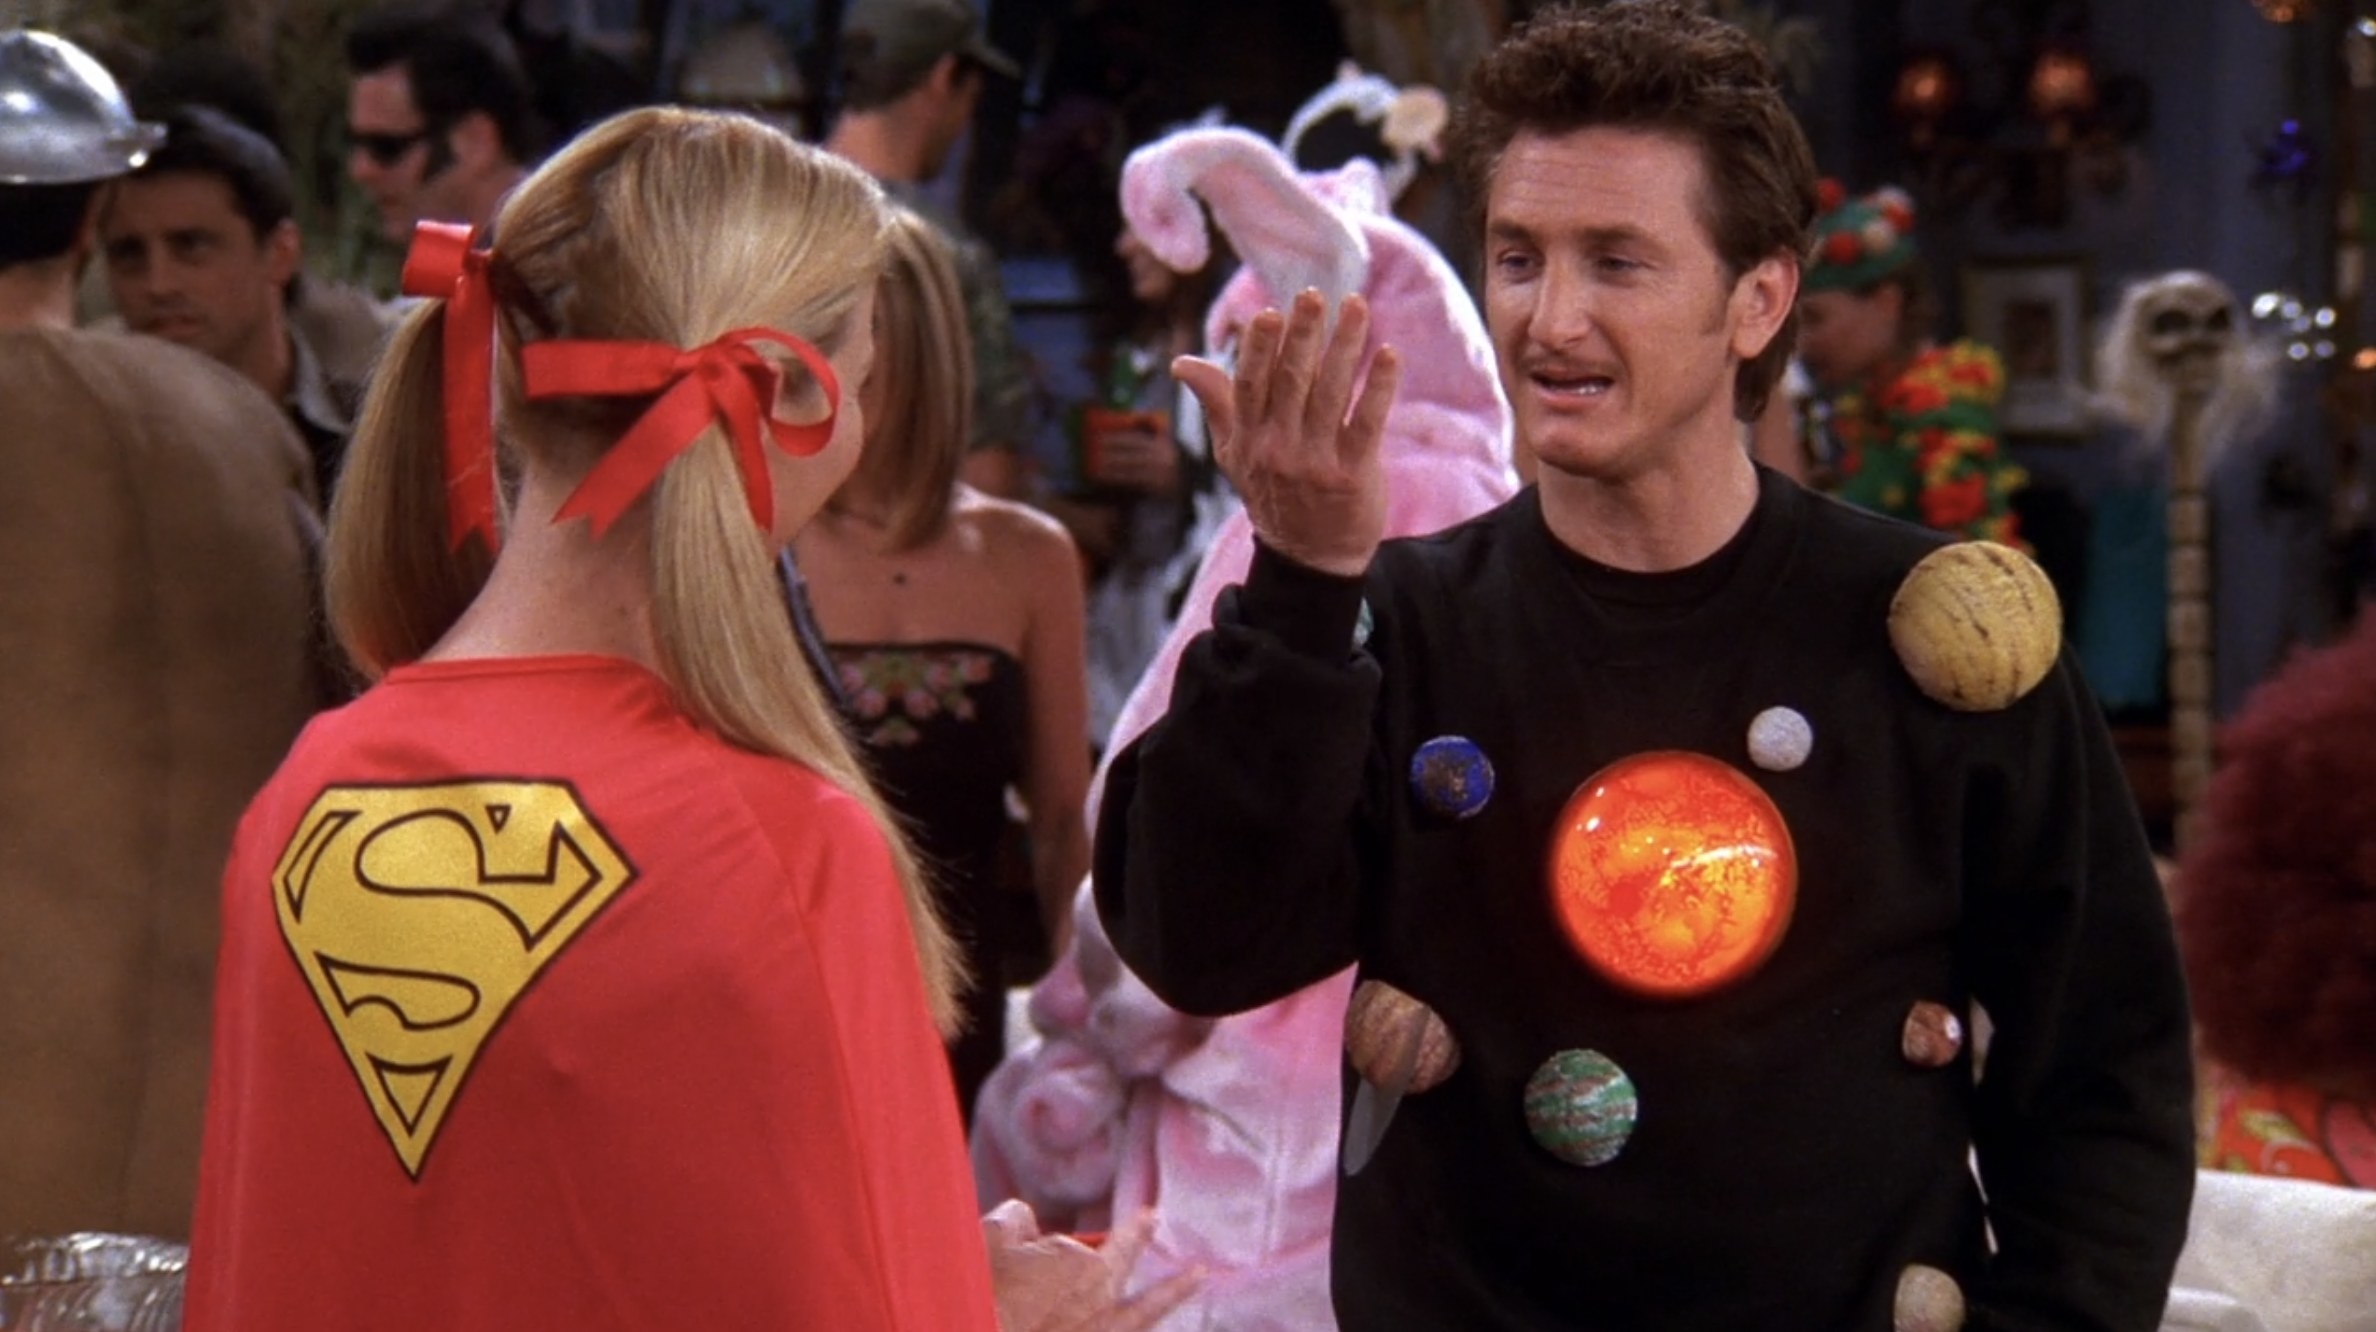 eric dressed as the solar system on friends